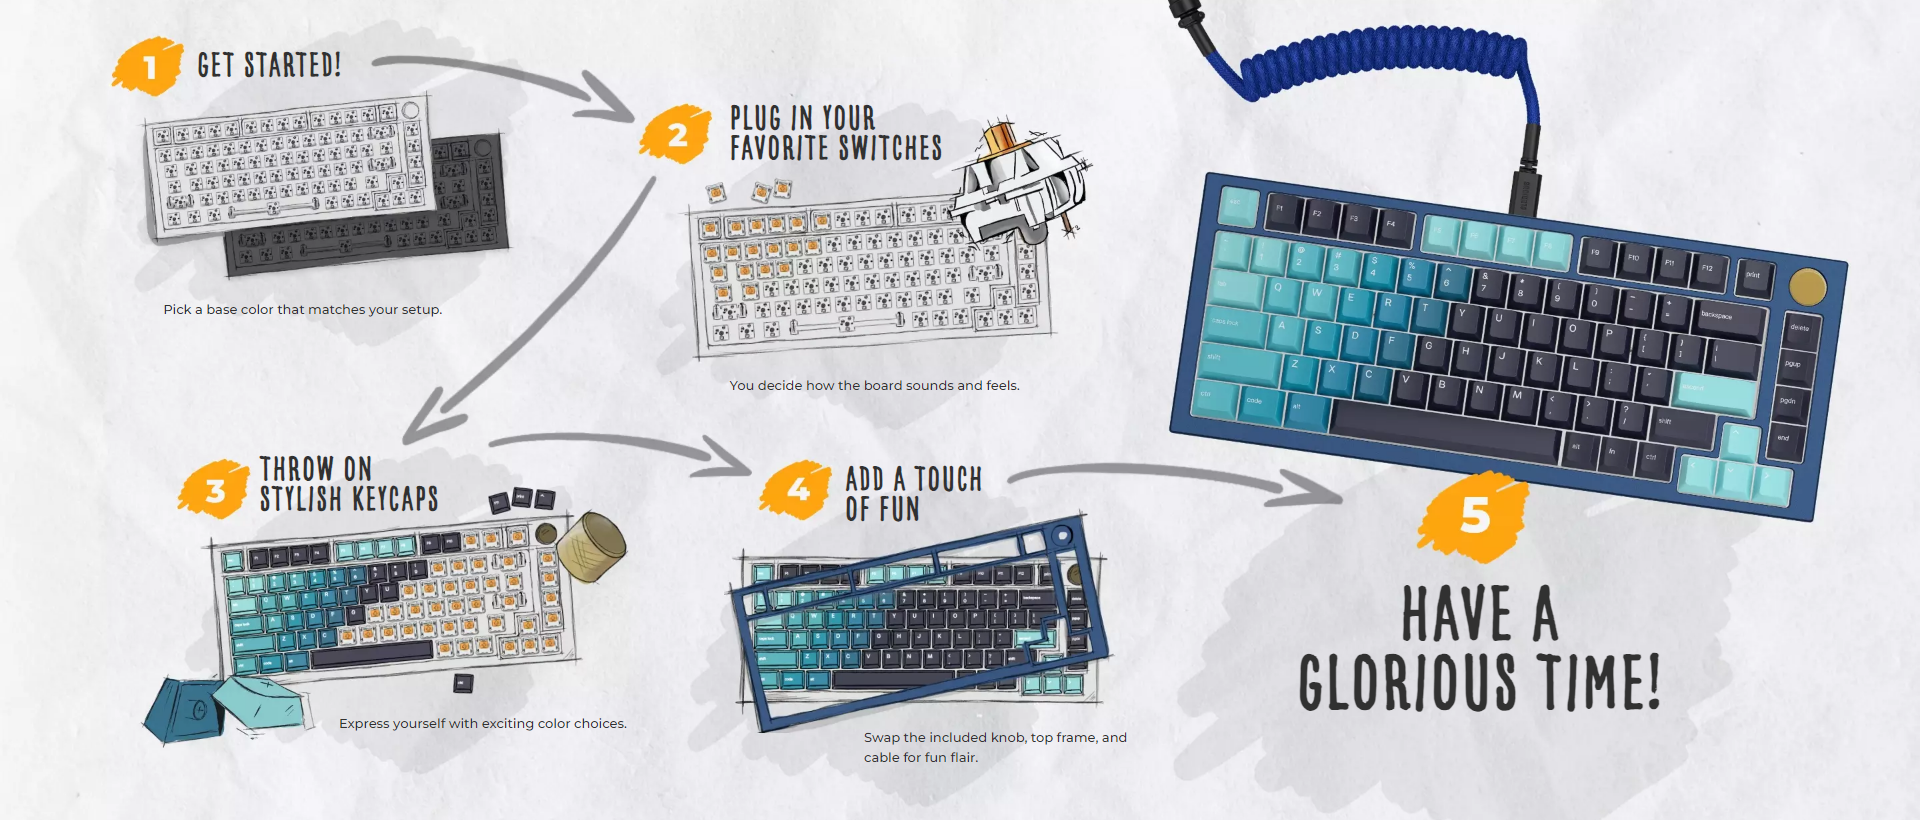 A large marketing image providing additional information about the product Glorious GMMK Pro 75% Mechanical Keyboard - White Ice (Barebones) - Additional alt info not provided